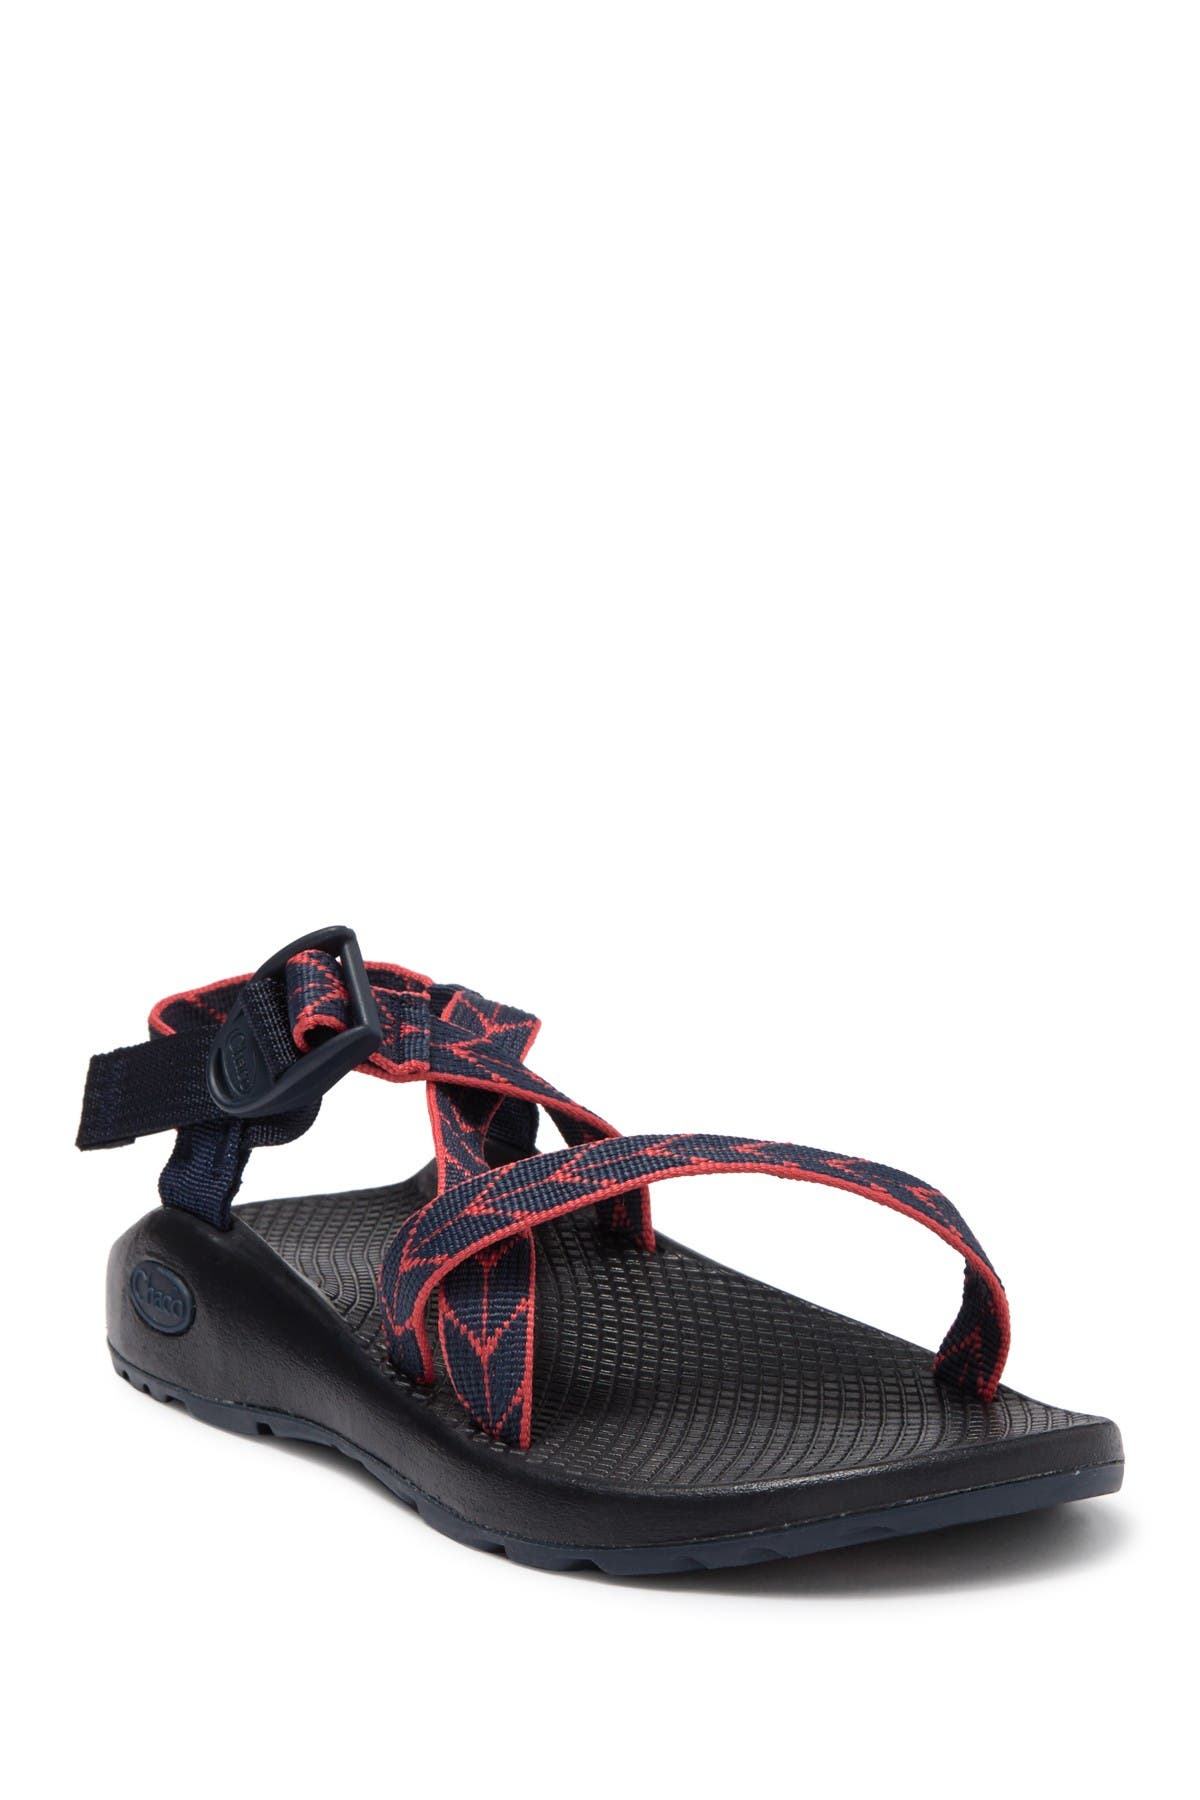 chaco z1 classic